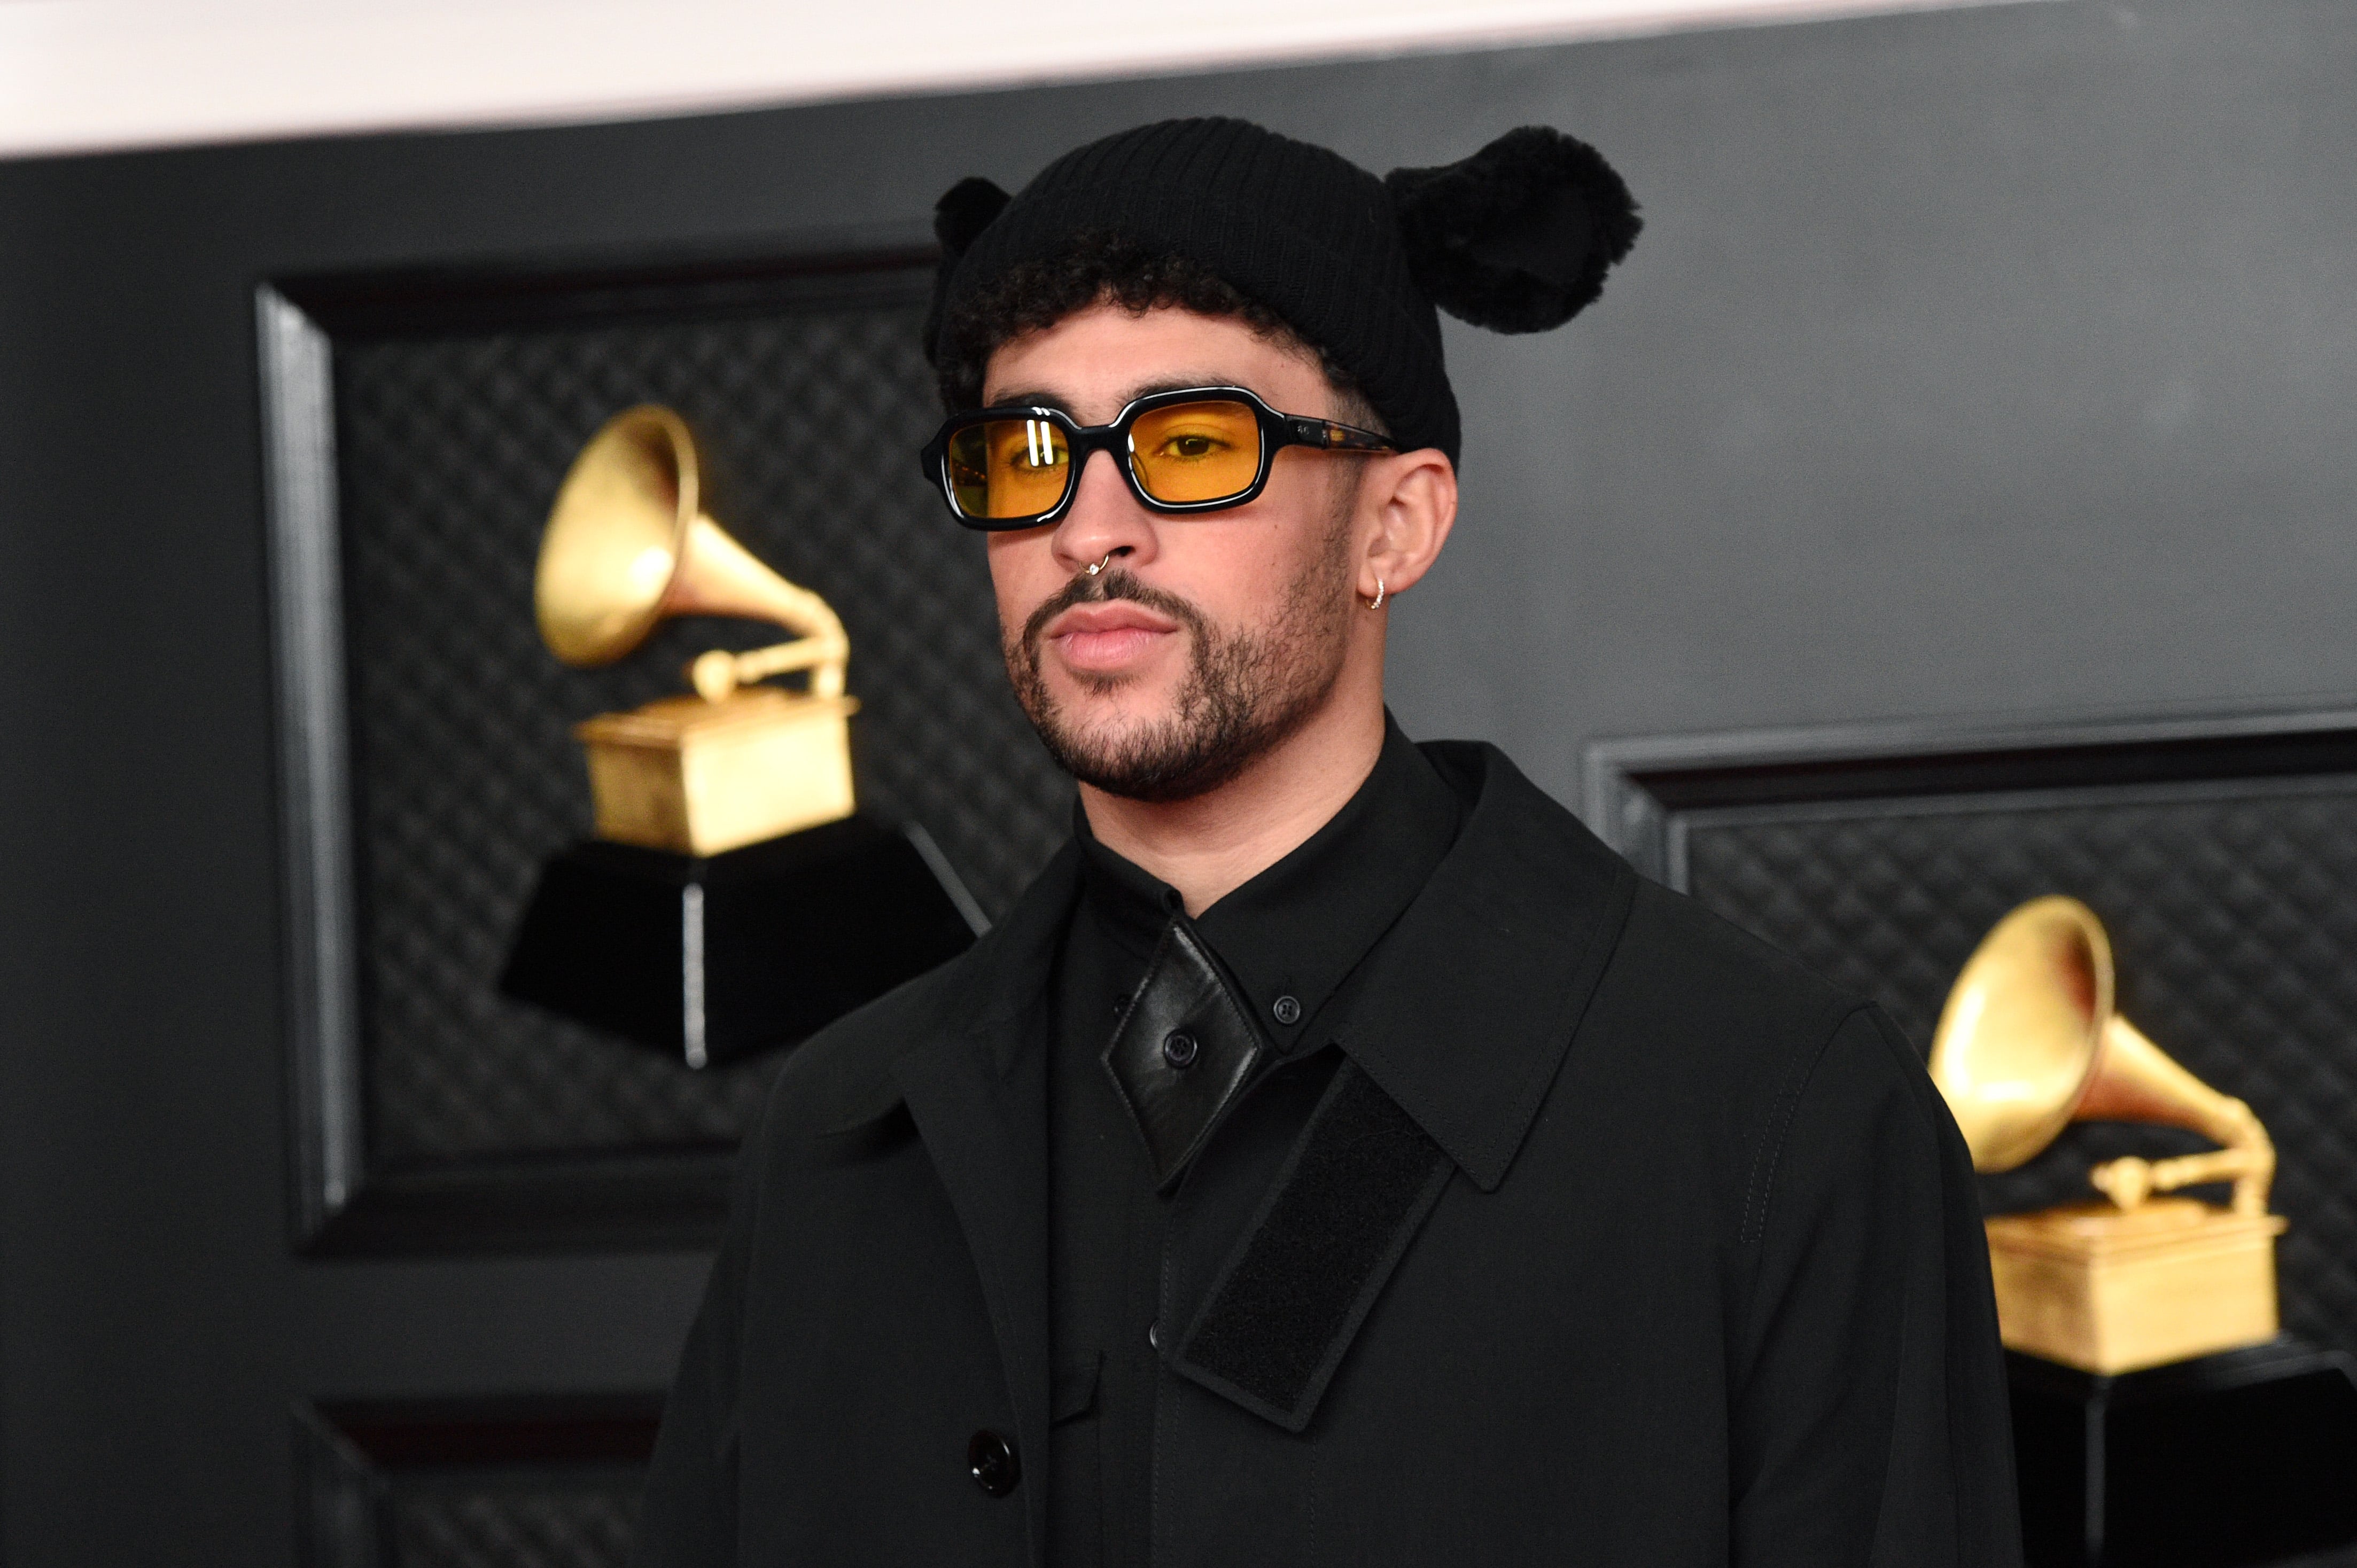 Bad Bunny's Brothers: Who Are the Siblings of the Puerto Rican Star?